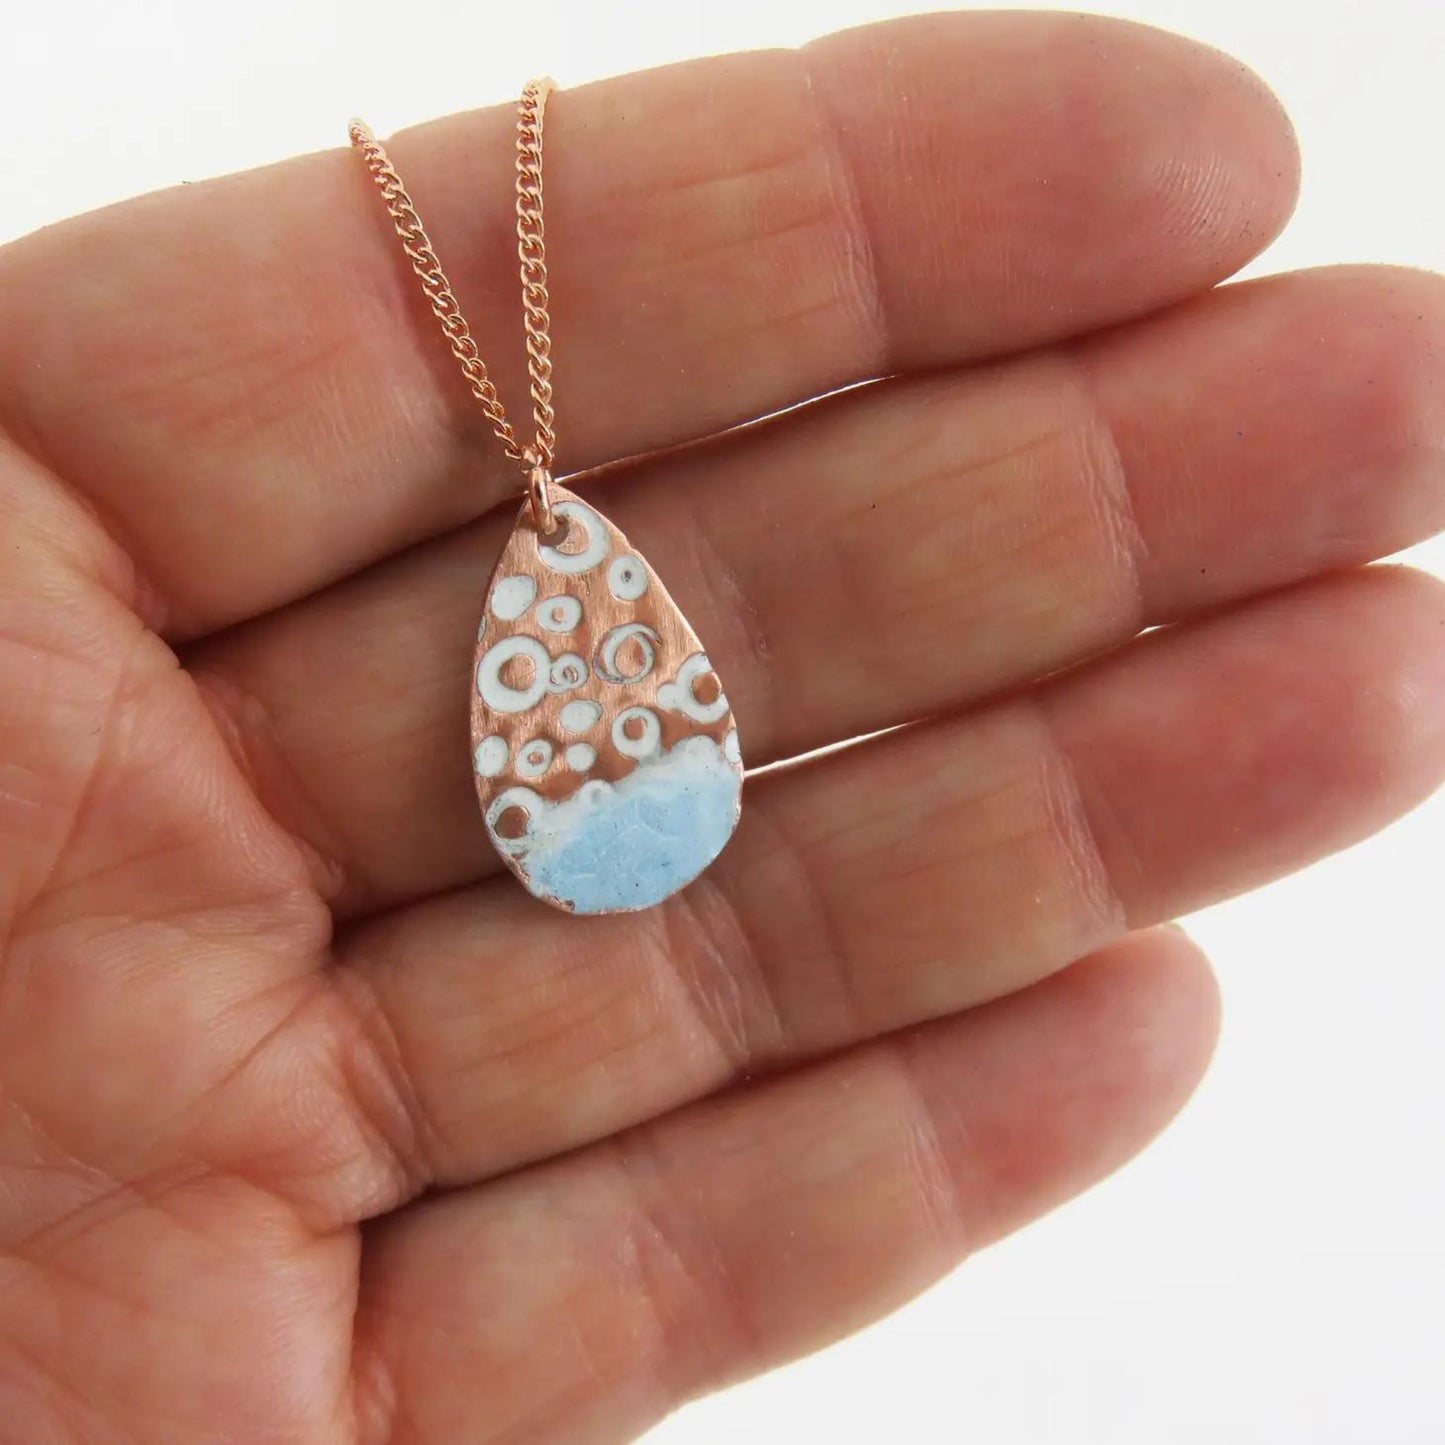 Textured Copper Teardrop Pendant with Blue and White Enamel - The Little Jewellery Company